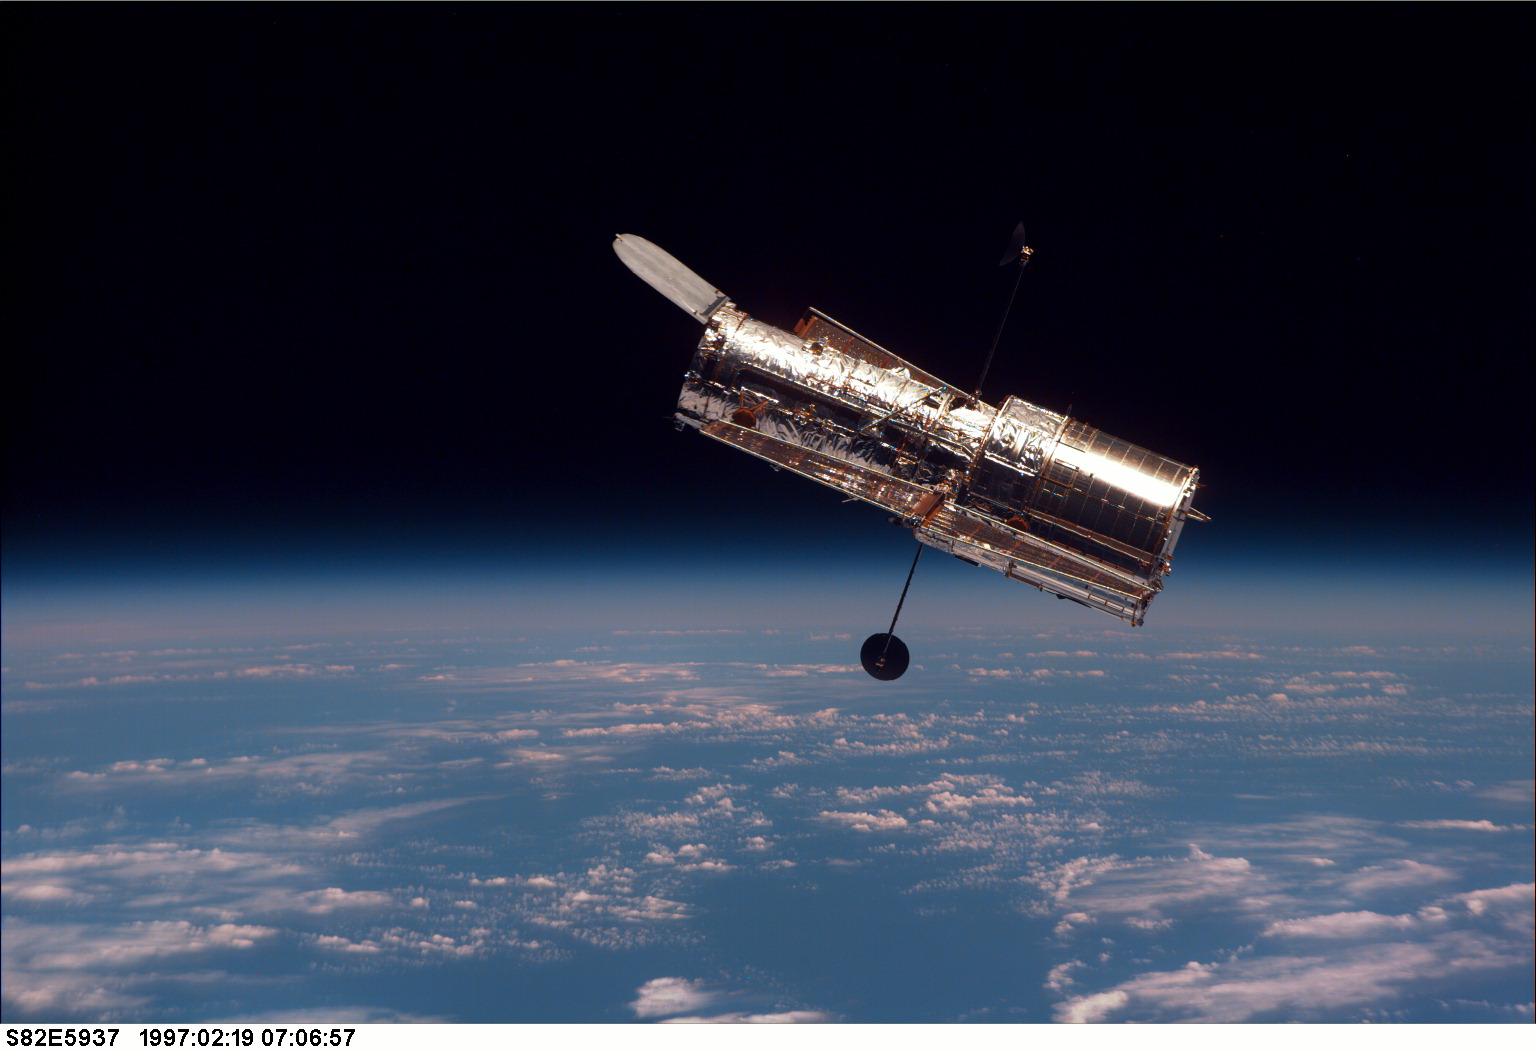 Twenty years ago, on STS-82, the Hubble Space Telescope was transformed from a 1970s instrument with 1980s optics into an observatory for 21st-century scientific discovery. Photo Credit: NASA